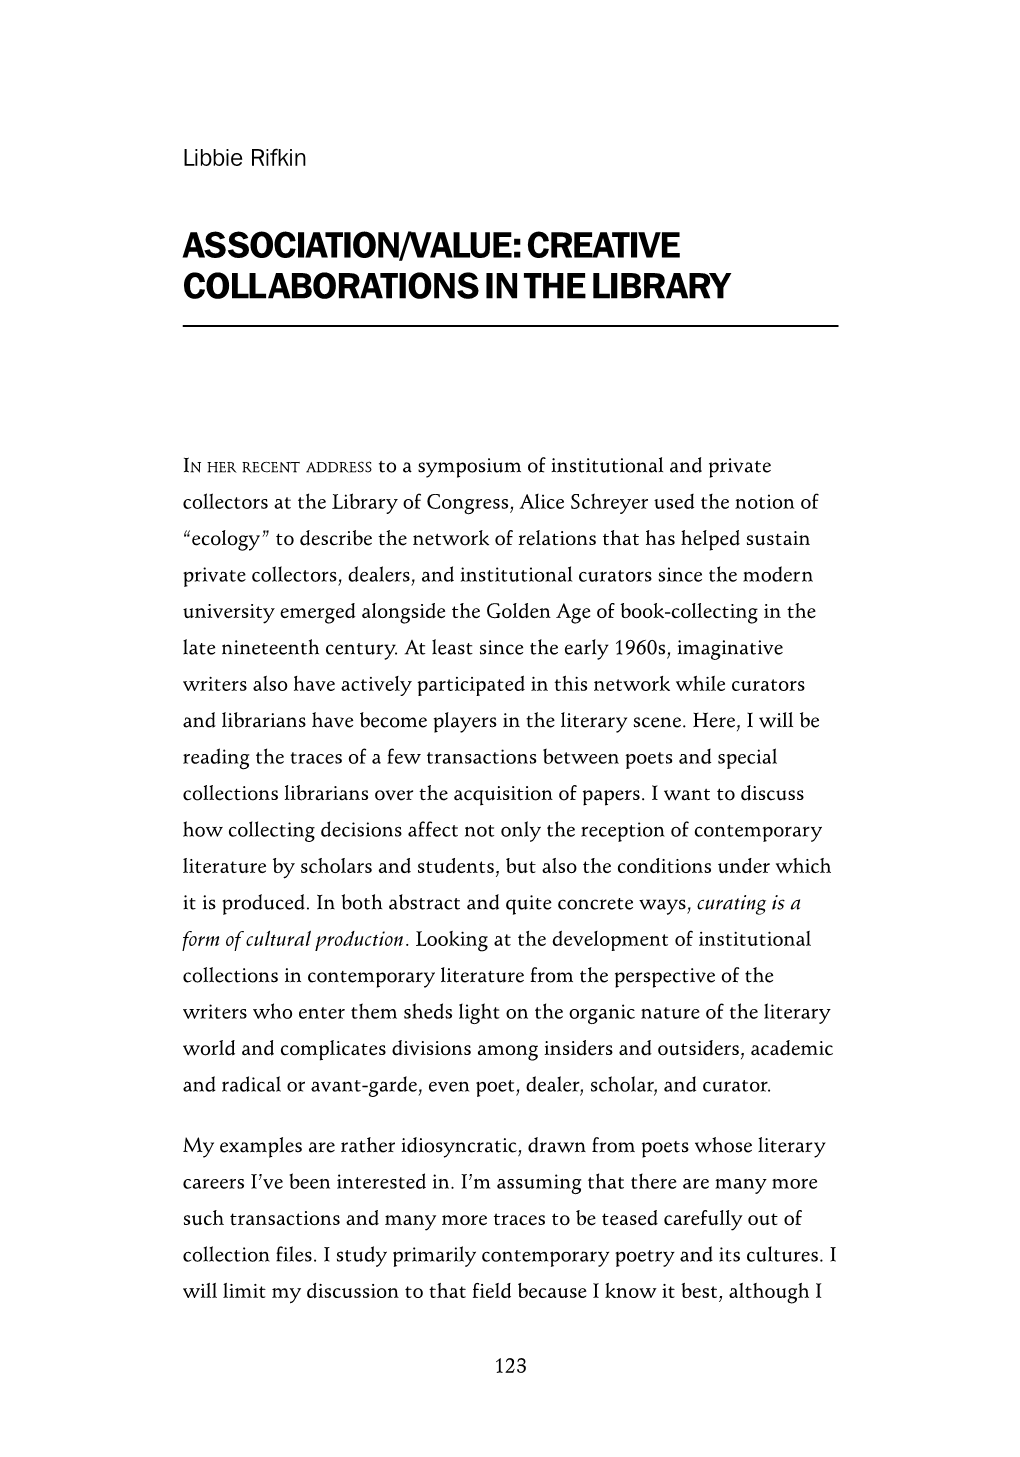 Associationnvalue: Creative Collaborations in the Library